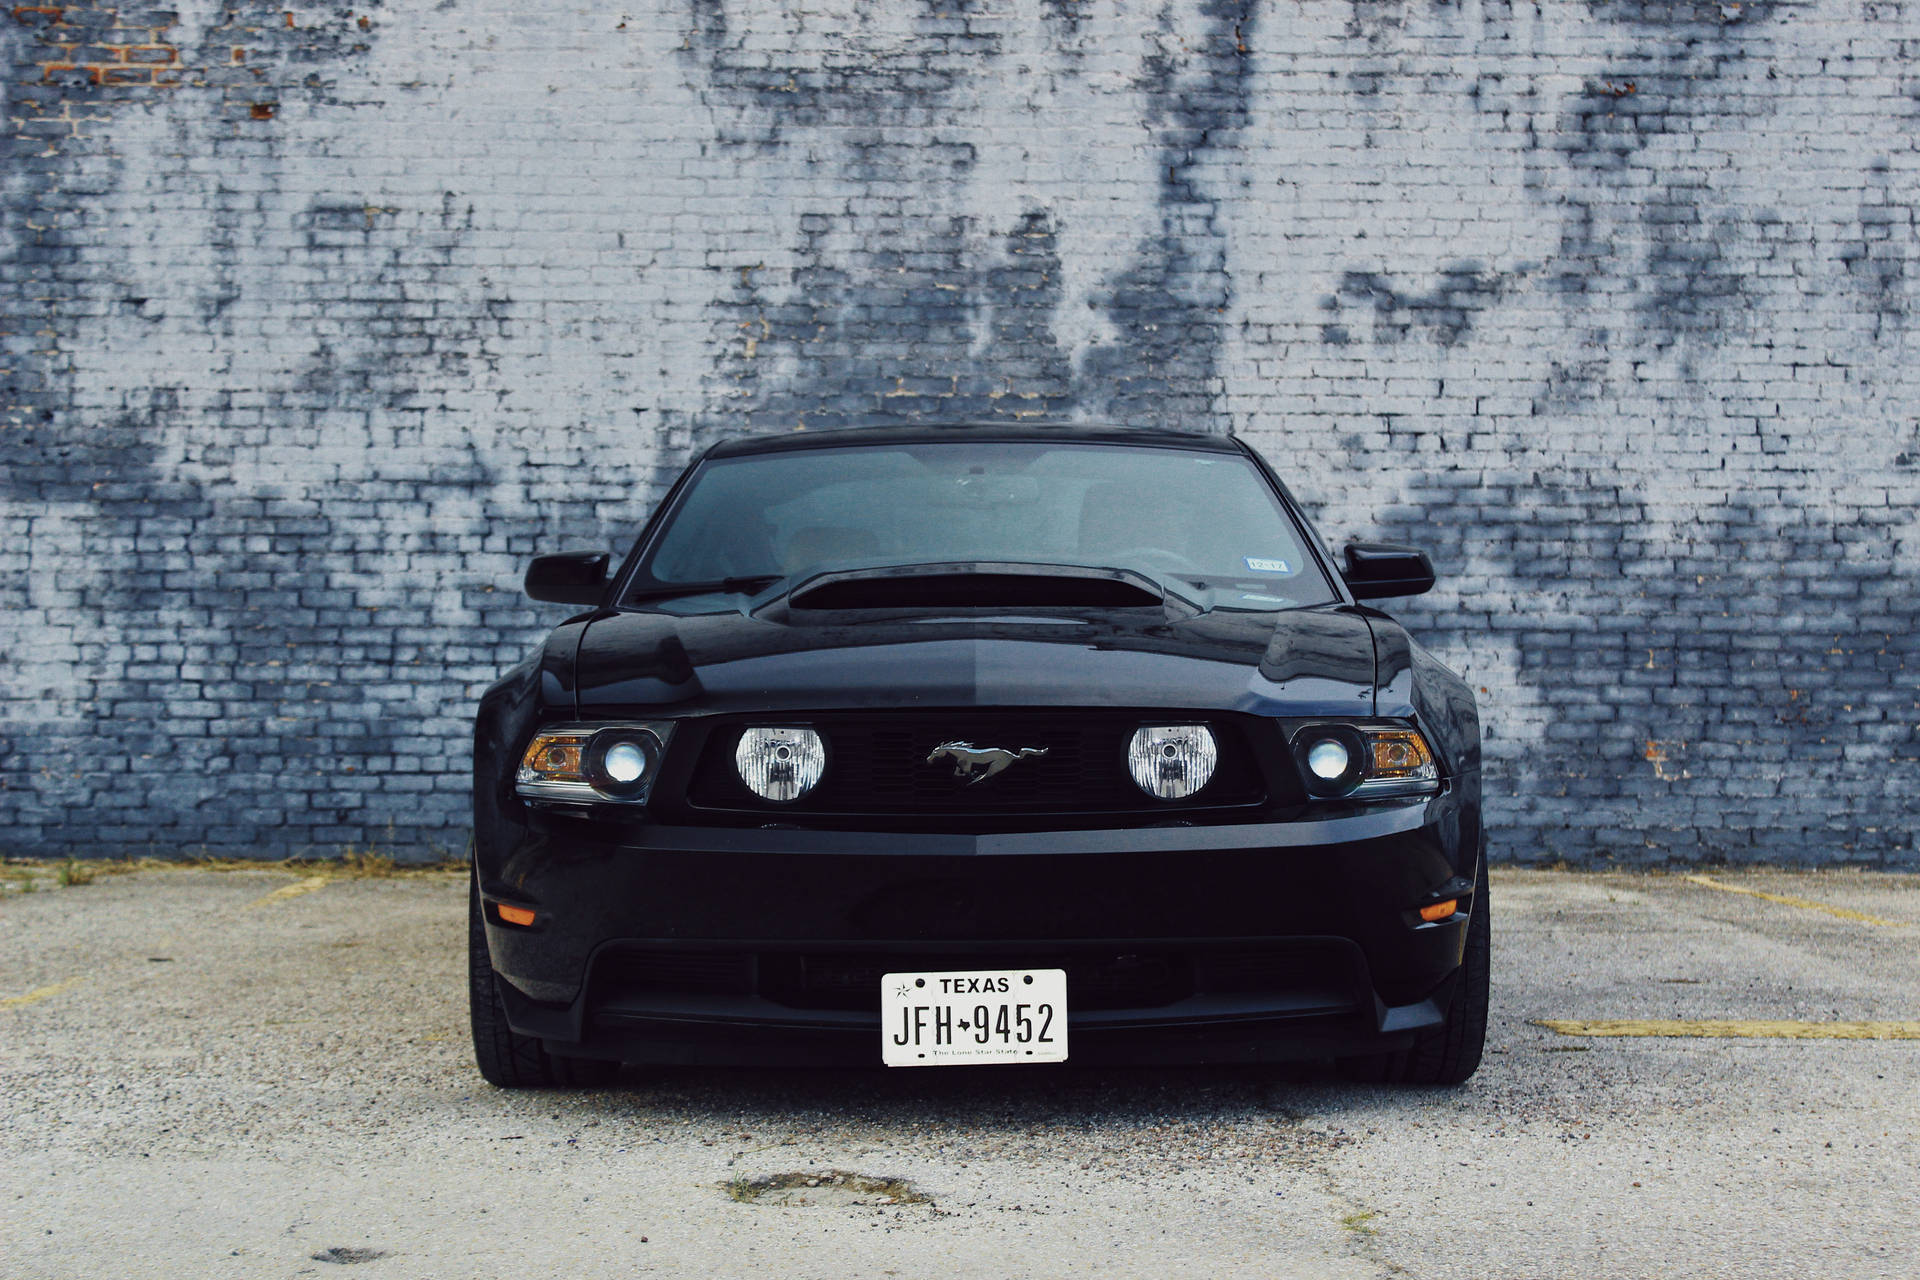 Mustang 5184X3456 Wallpaper and Background Image